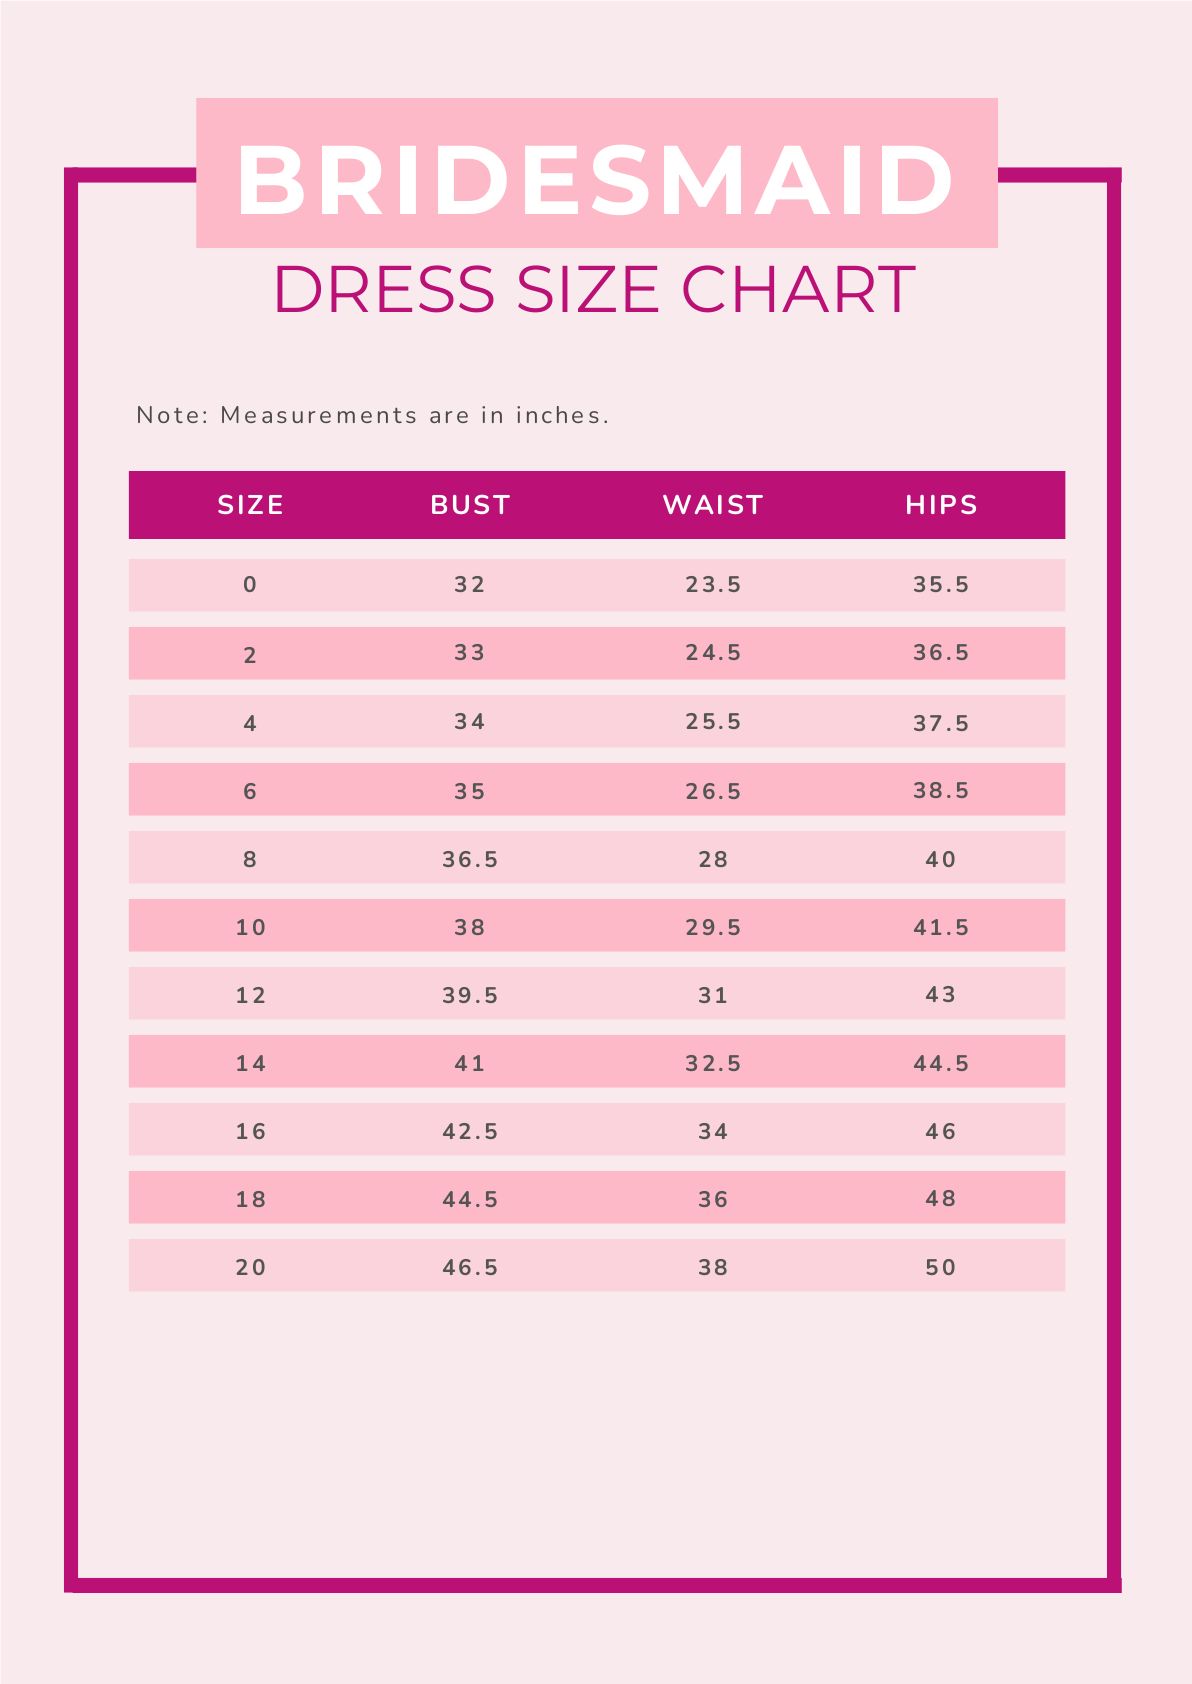 Bridesmaid Dress Size Chart in PDF